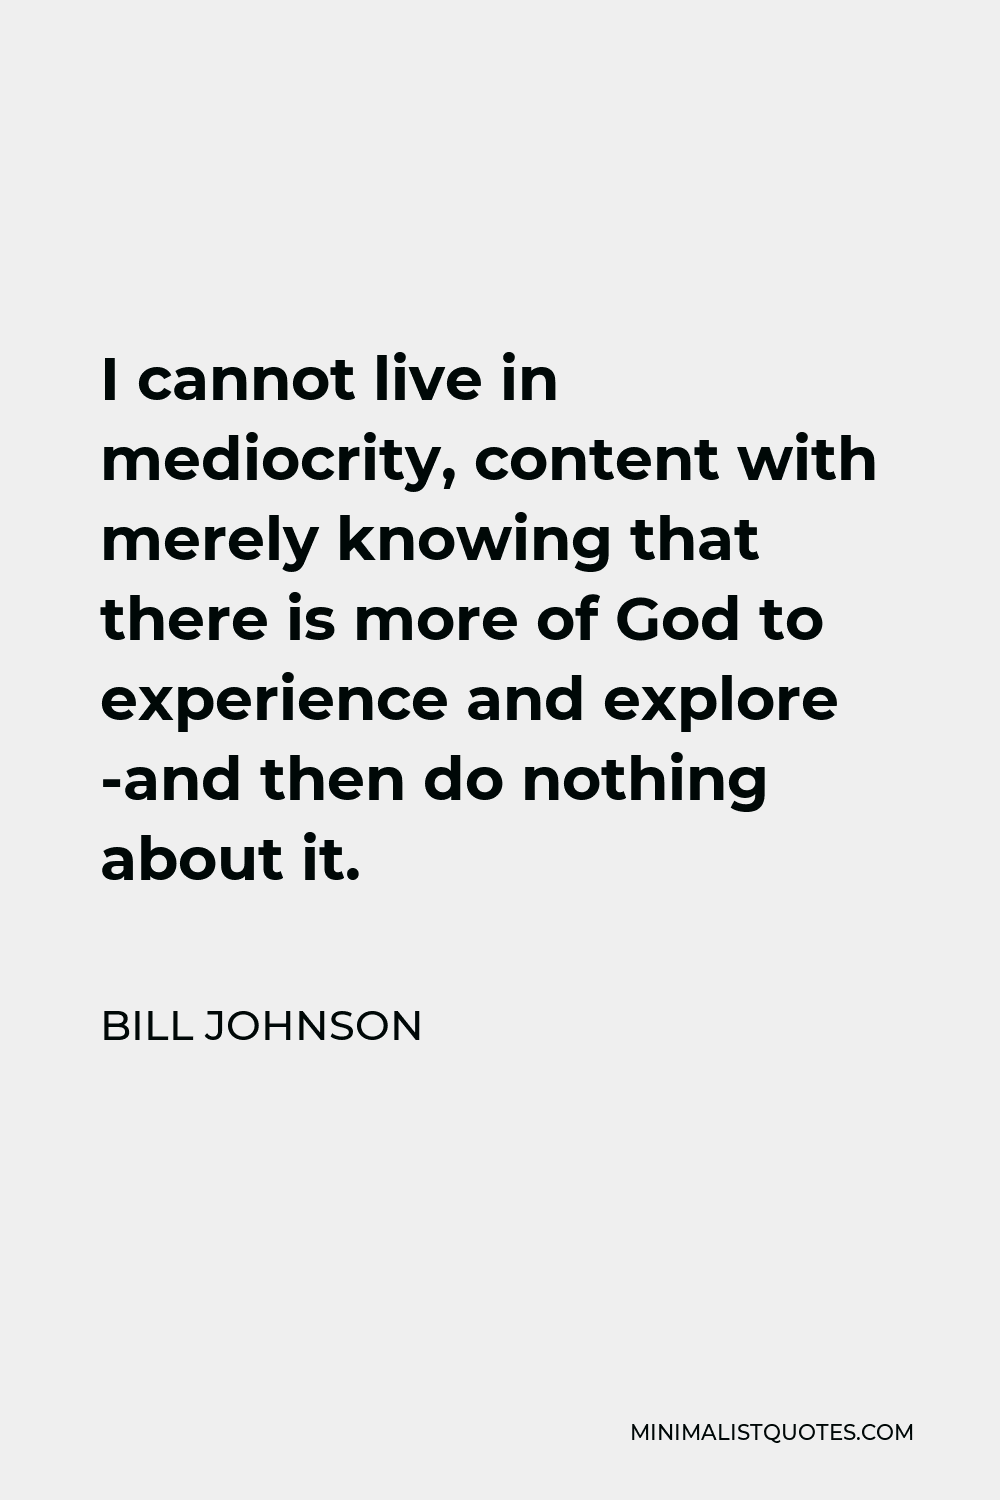 Bill Johnson Quote - I cannot live in mediocrity, content with merely knowing that there is more of God to experience and explore -and then do nothing about it.